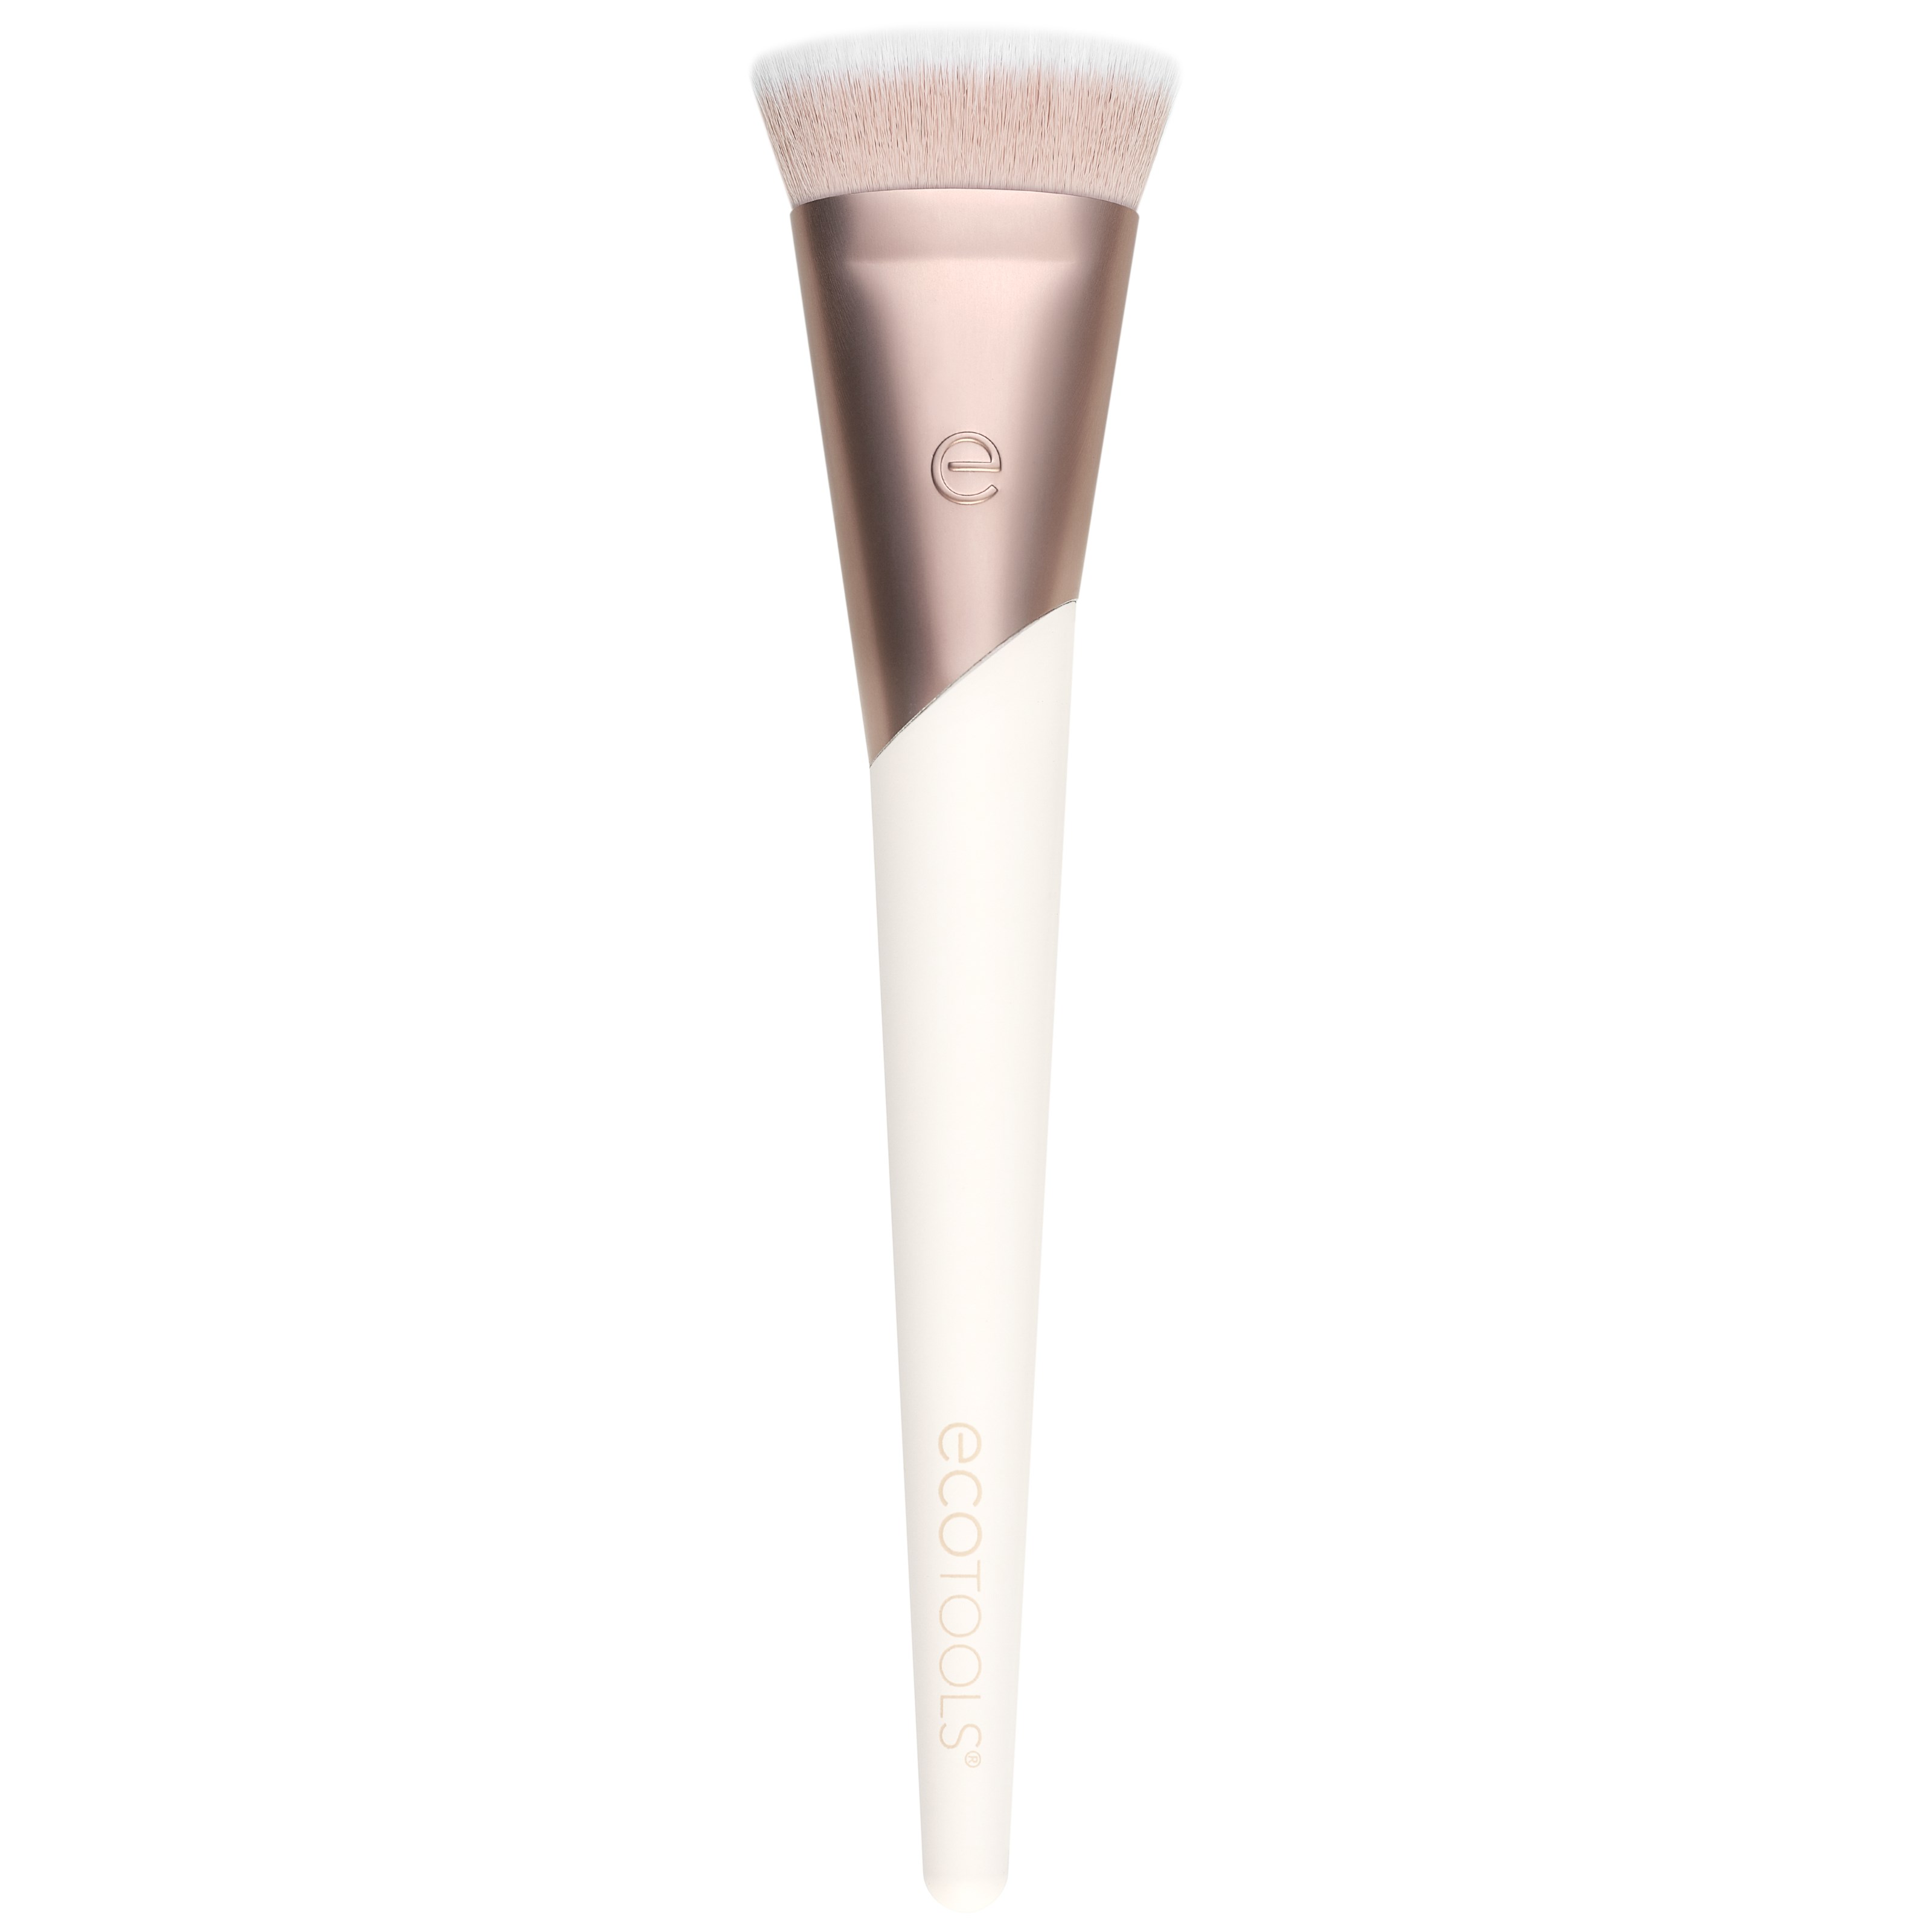 Bilde av Ecotools Luxe Collection Flawless Foundation Makeup Brush